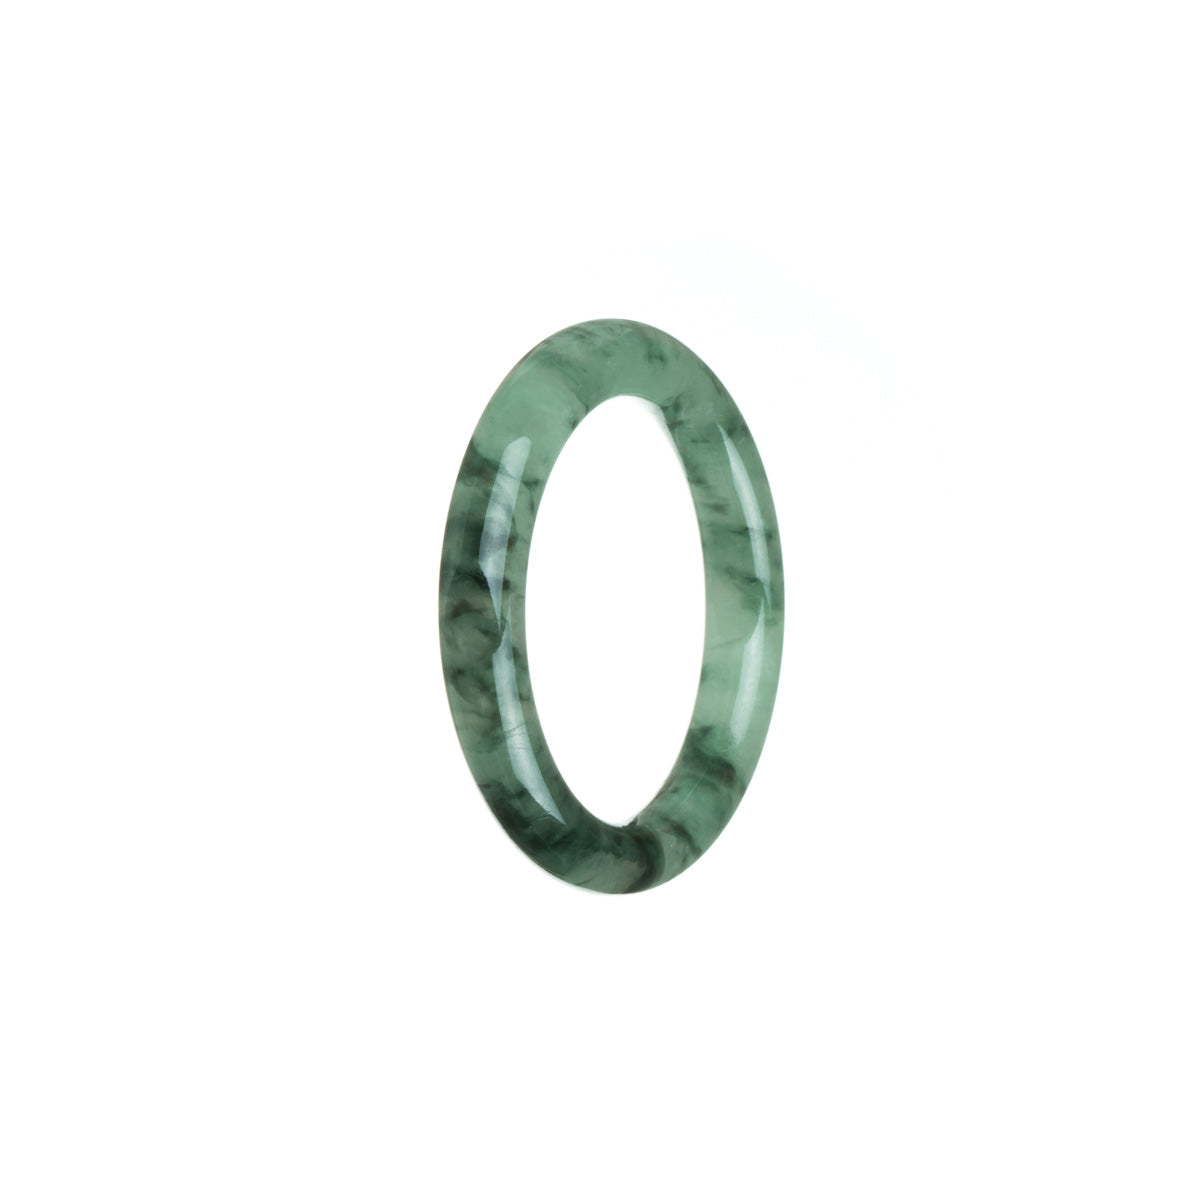 A close-up of a beautiful green jade bangle with intricate patterns, perfect for a child.